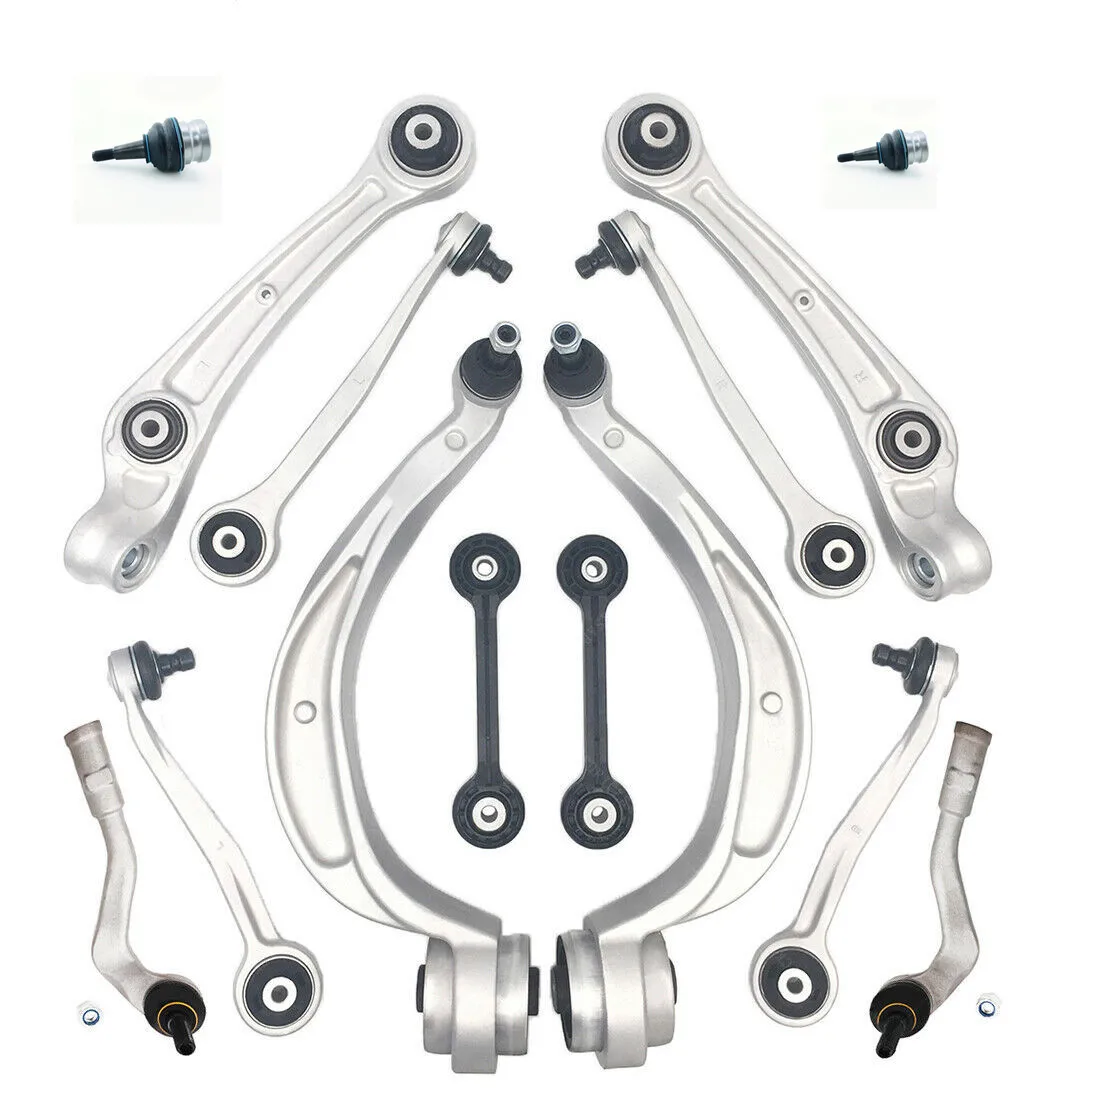 Suspension control arms wishbone set audi A4 B8 A5 8TA 8T3 Q5 8R front Rear 14pcs with 12mm ball joint (1600262364422)